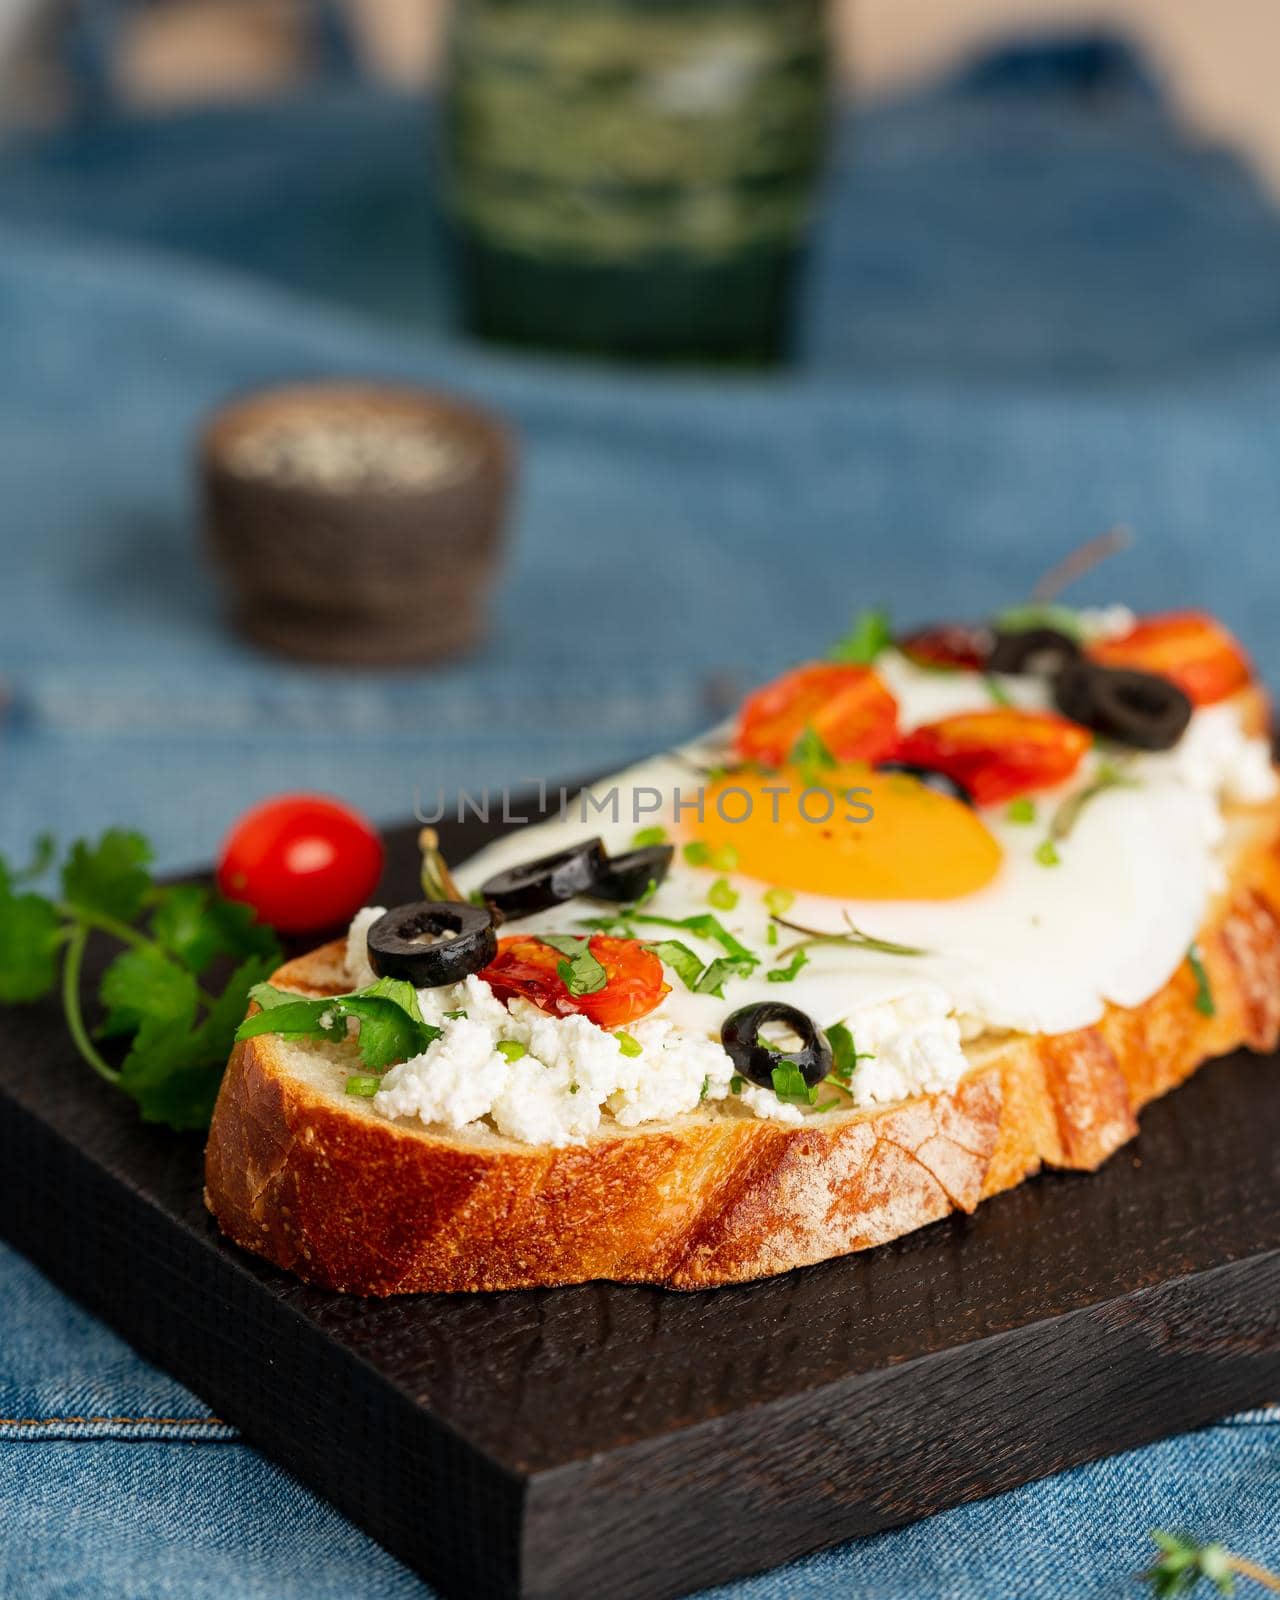 Toasted bread toast with fried eggs with yellow yolk and tomatoes, olives, sprinkled with herbs on dark wooden serving board on blue denim napkin, vertical